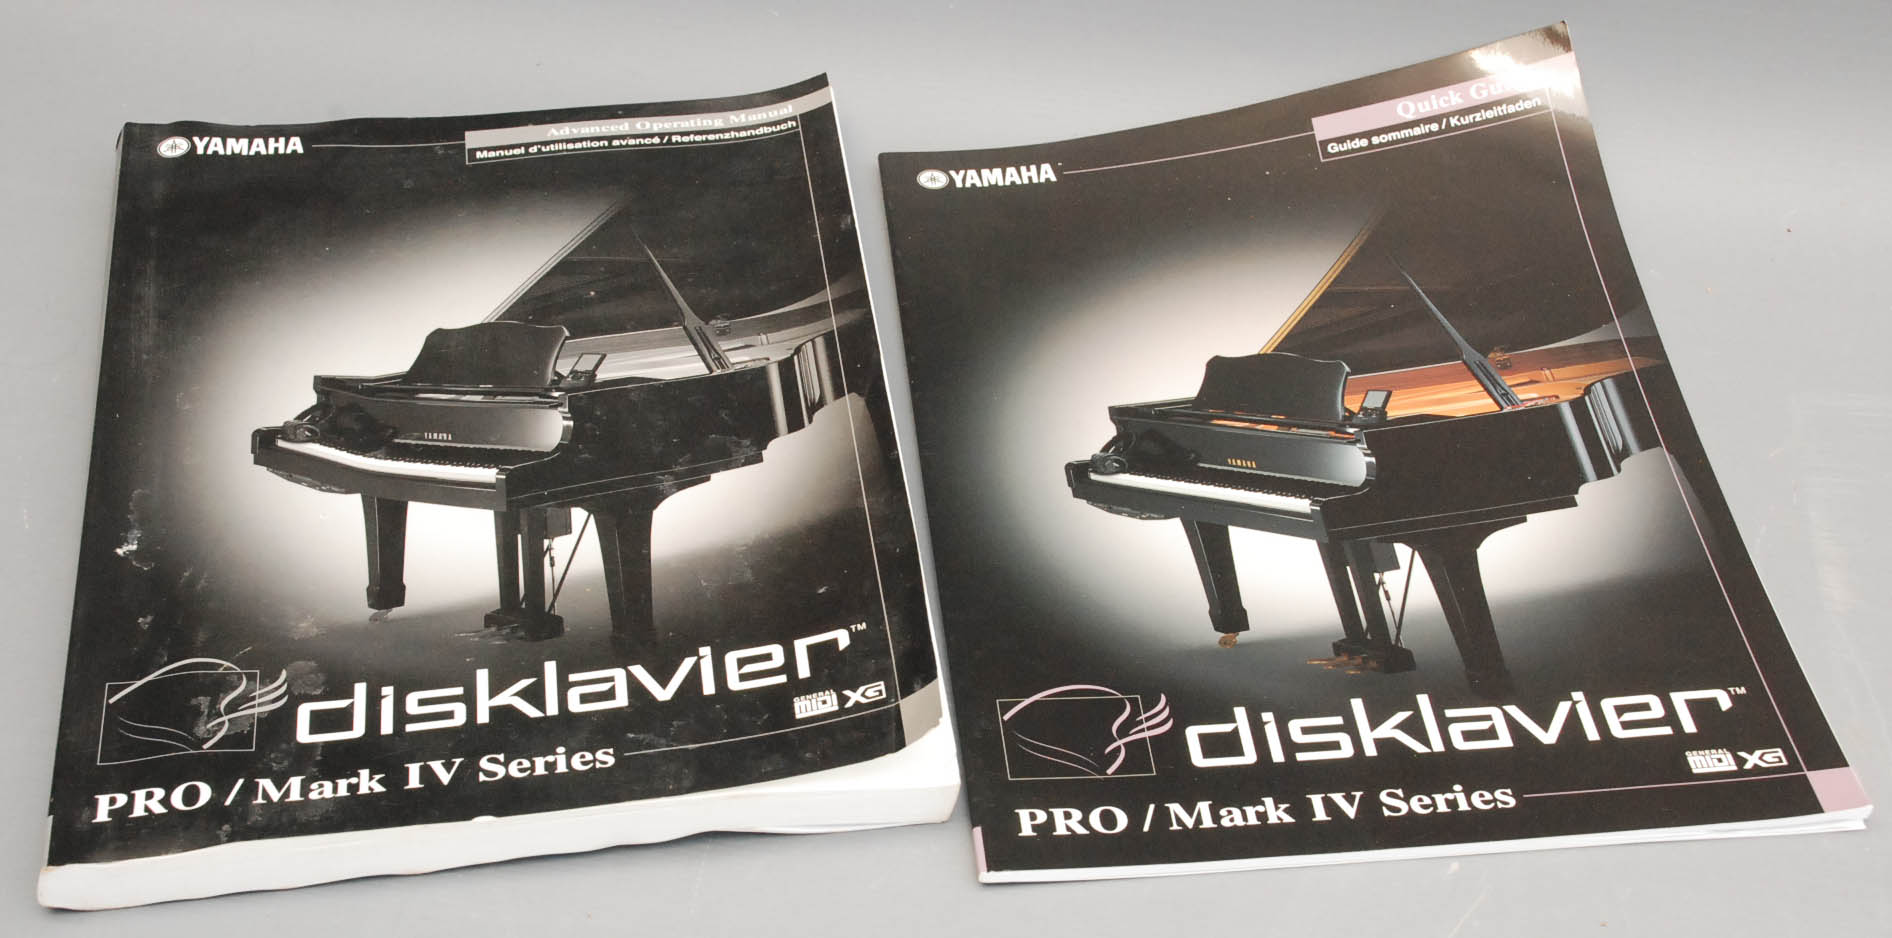 how to check yamaha piano serial number uk